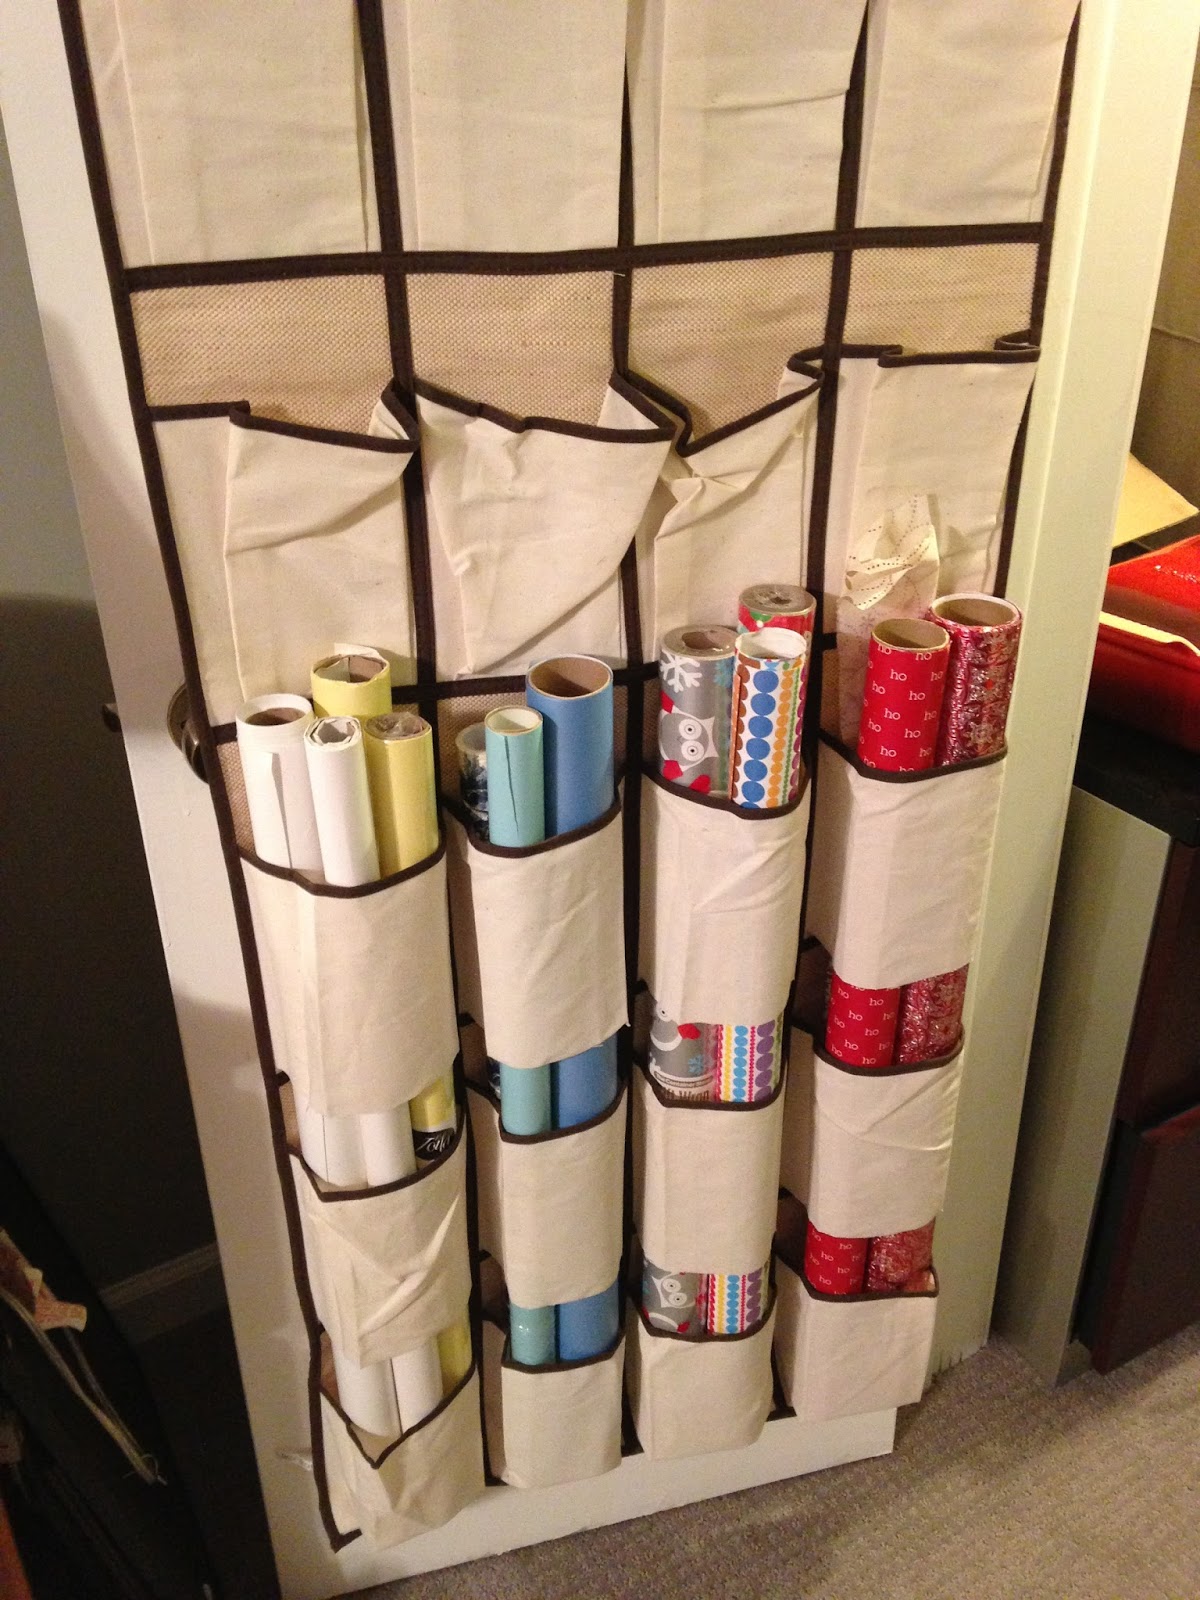 Stick wrapping paper in shoe rack